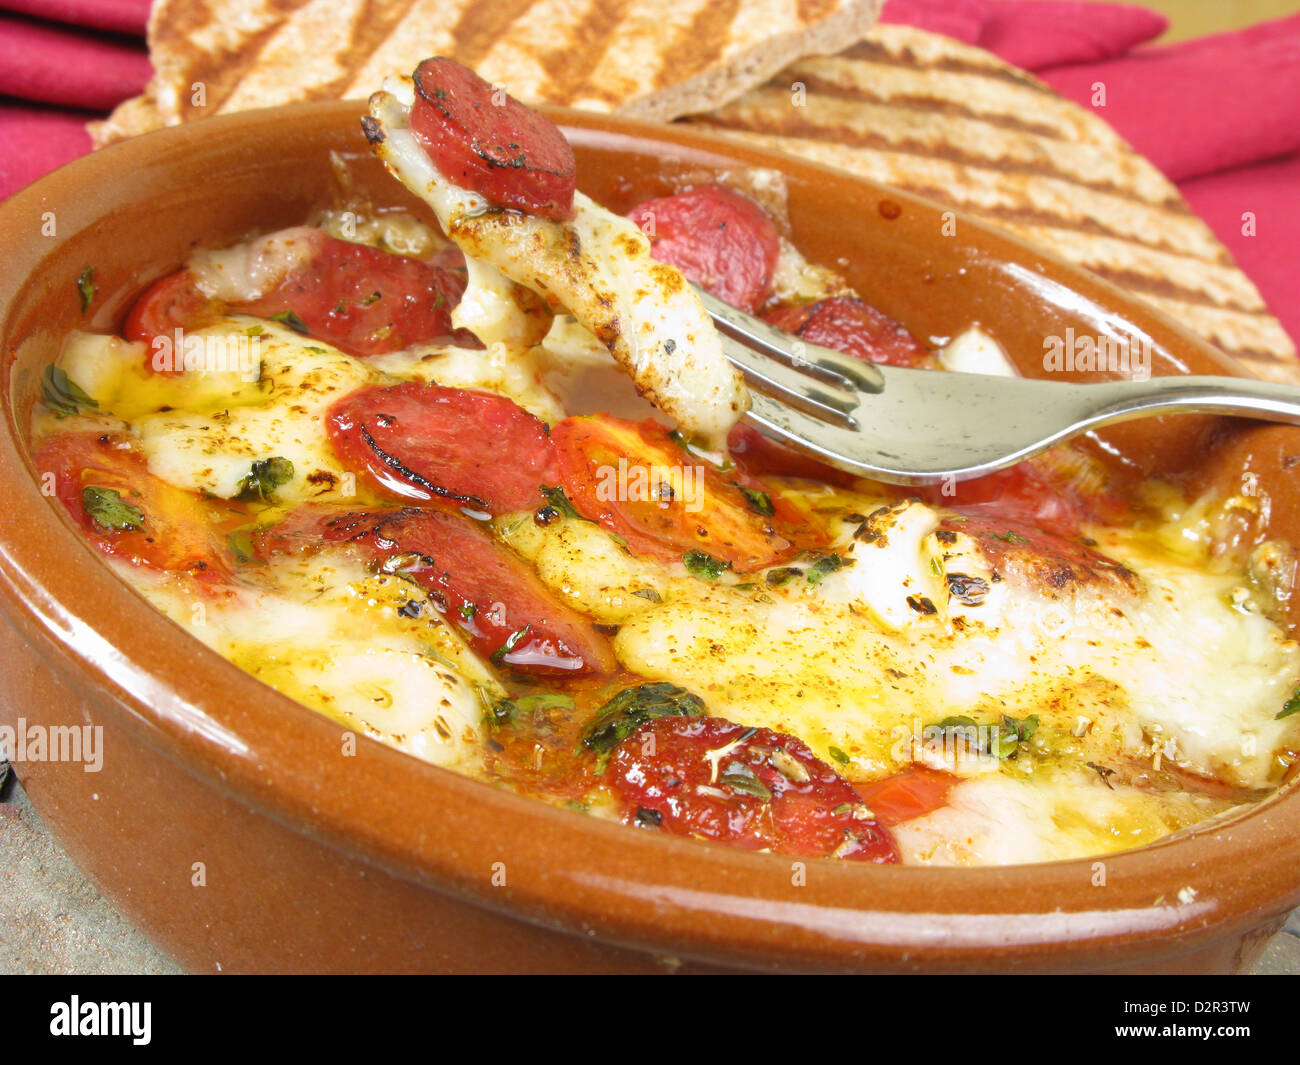 A typical Greek dish of saganaki (baked cheese) with loukanika (spicy ...